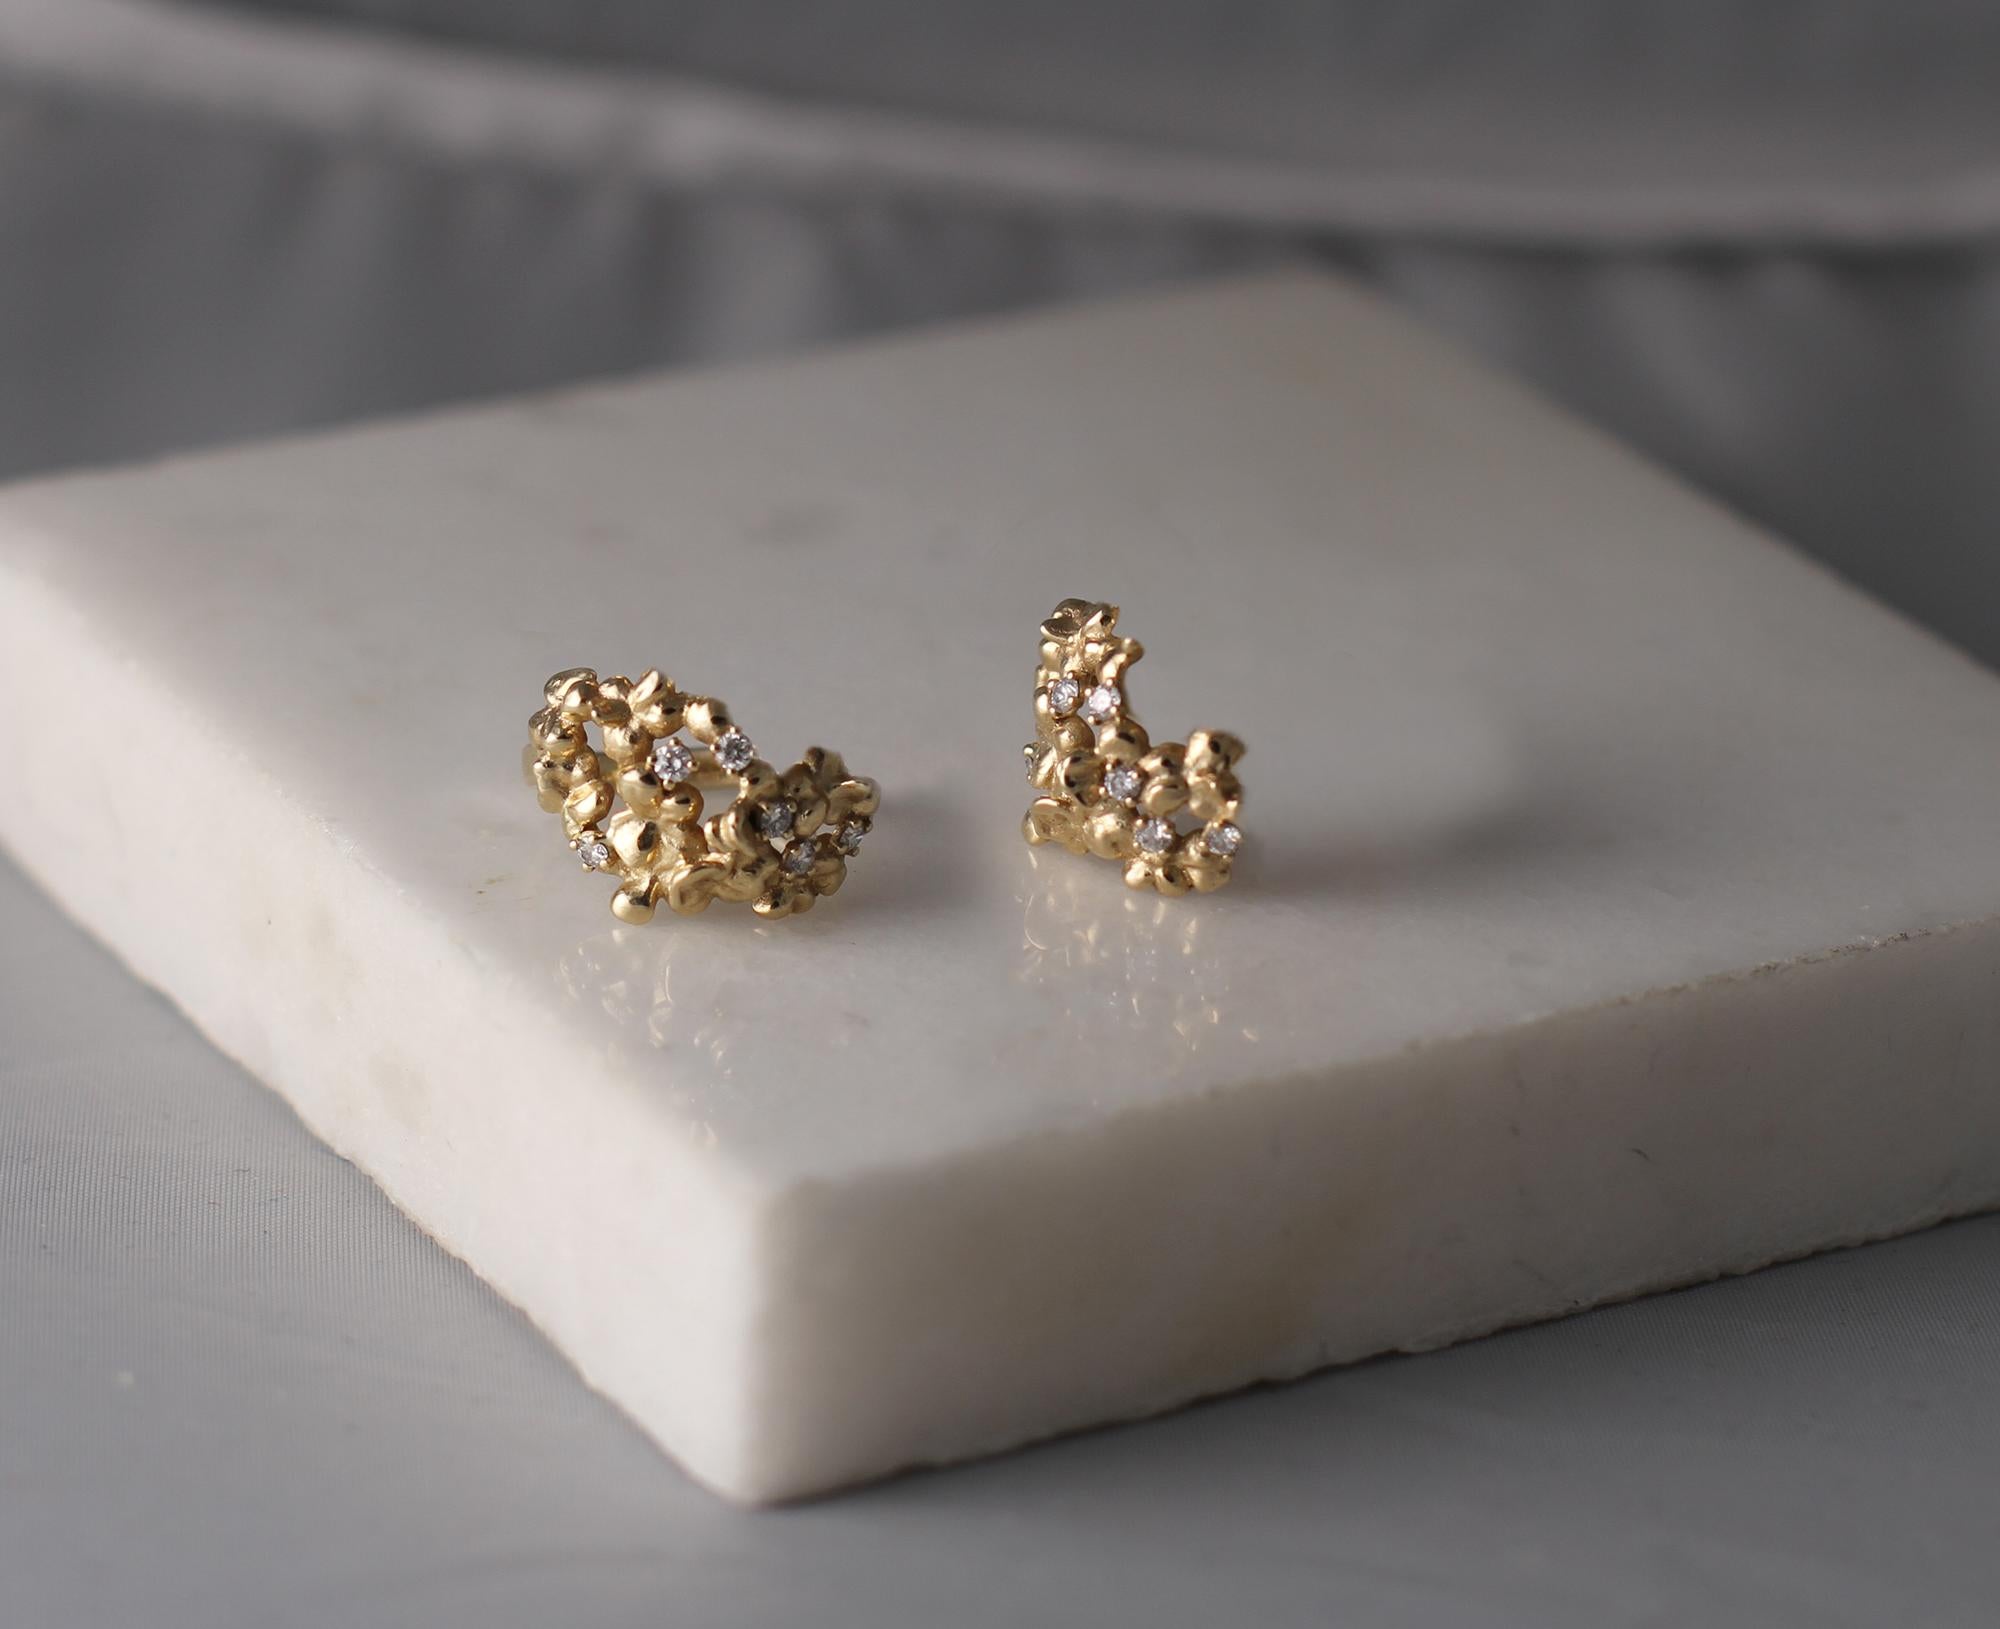 This contemporary Hortensia floral earrings are made of 18 karat yellow gold and feature round natural diamonds of VS clarity and F-G color. The sculptural design adds extra highlights to the surface of the gold, while the diamonds add a delicate